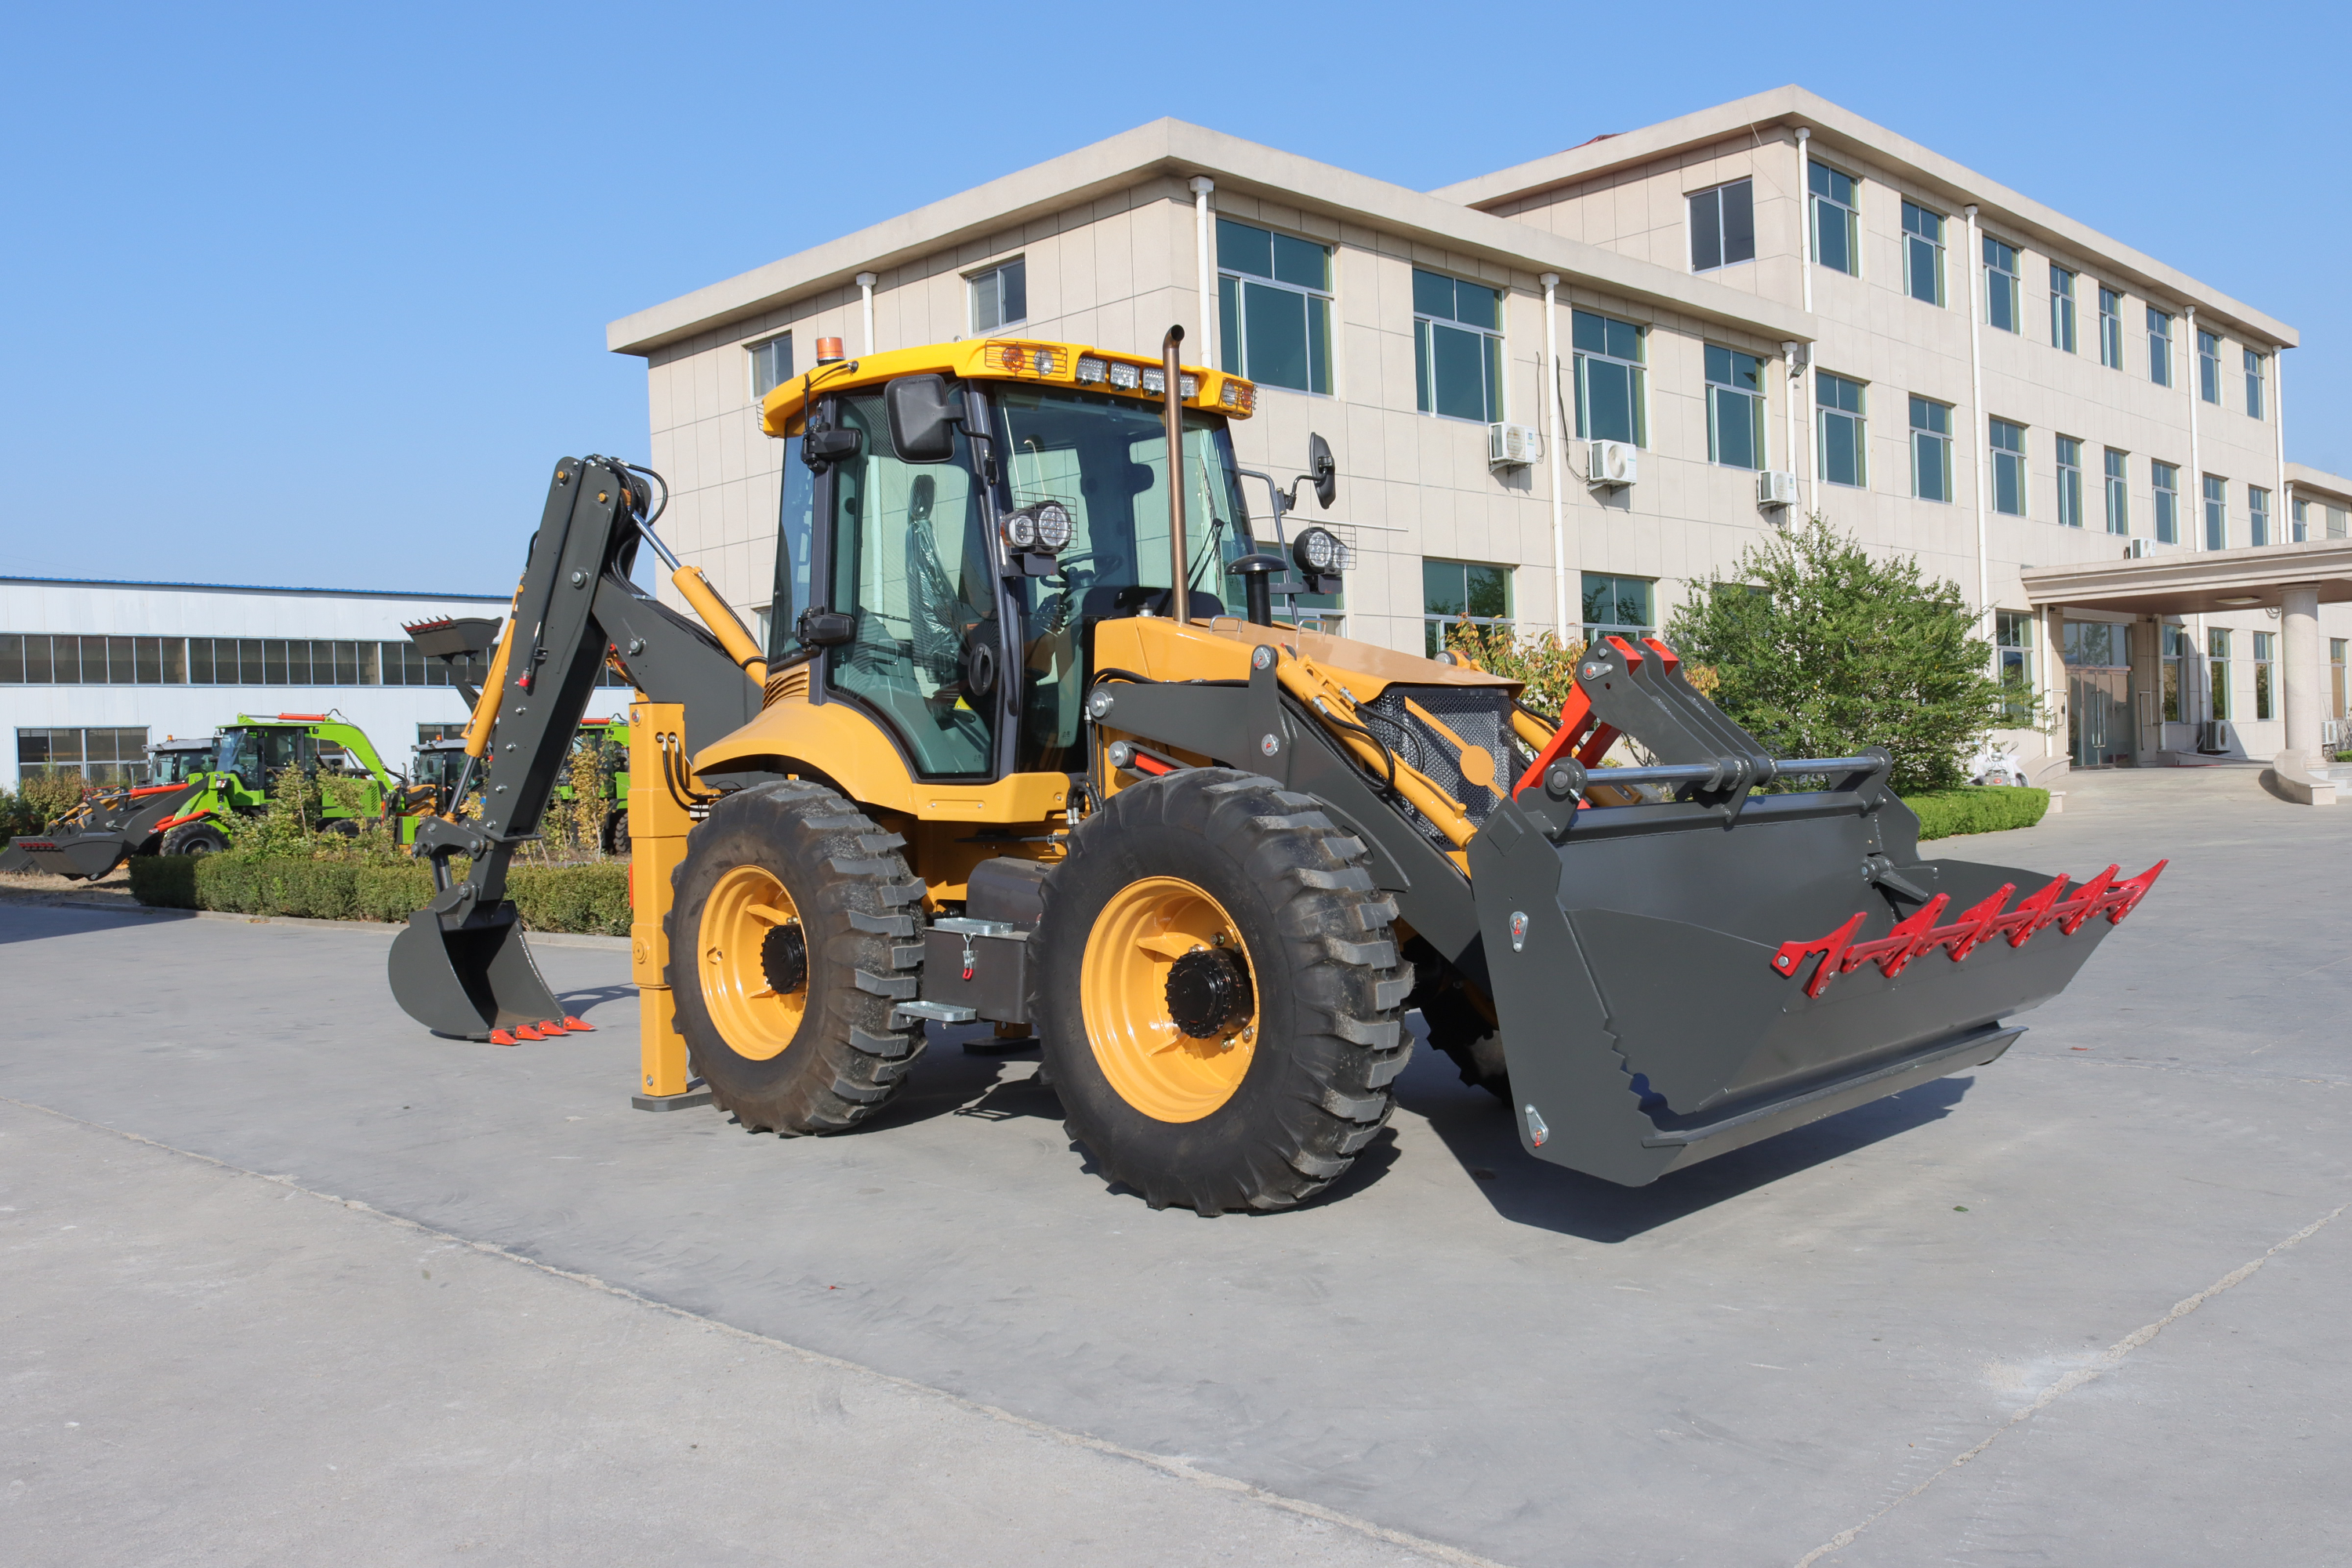 Yaweh JL4cx compact tractor with loader backhoe hydraulic pump mini backhoe excavator loader